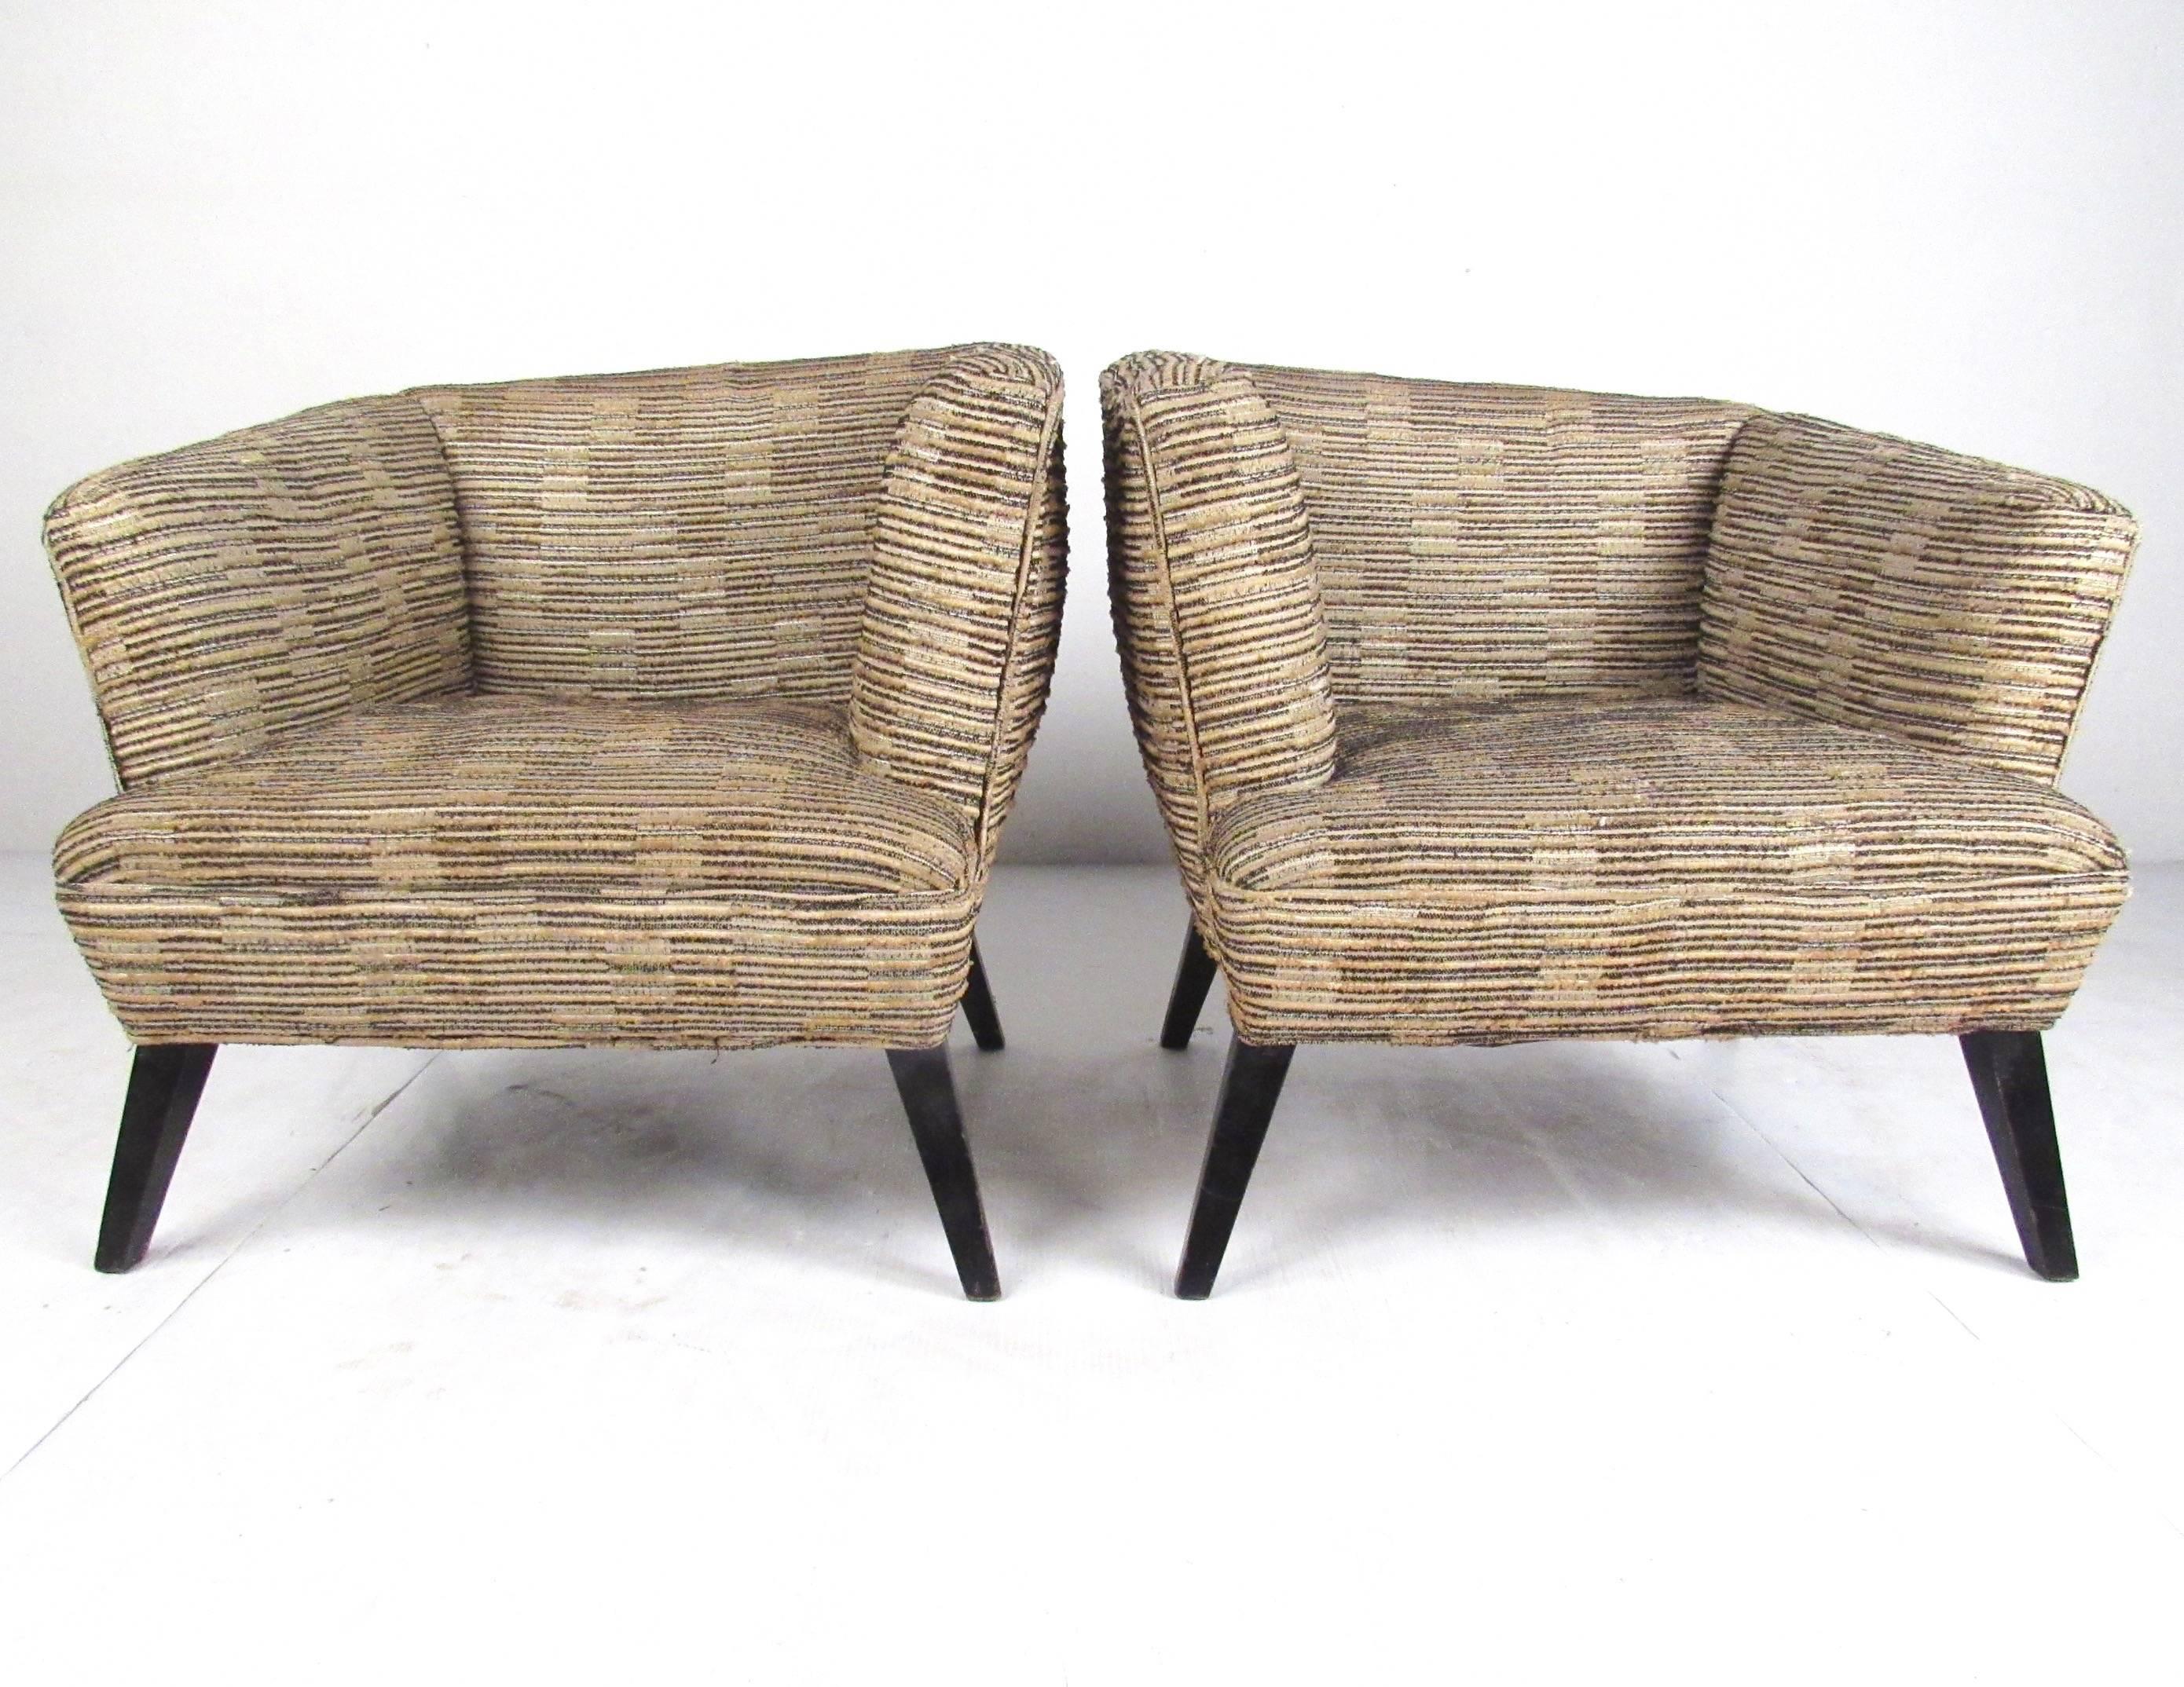 This unique pair of matched lounge chairs features plush upholstered club seats with abstract angled seat backs for an Art Deco like appeal. Mid-Century Modern design is showcased in the vintage fabric, original modern lines, and tapered hardwood